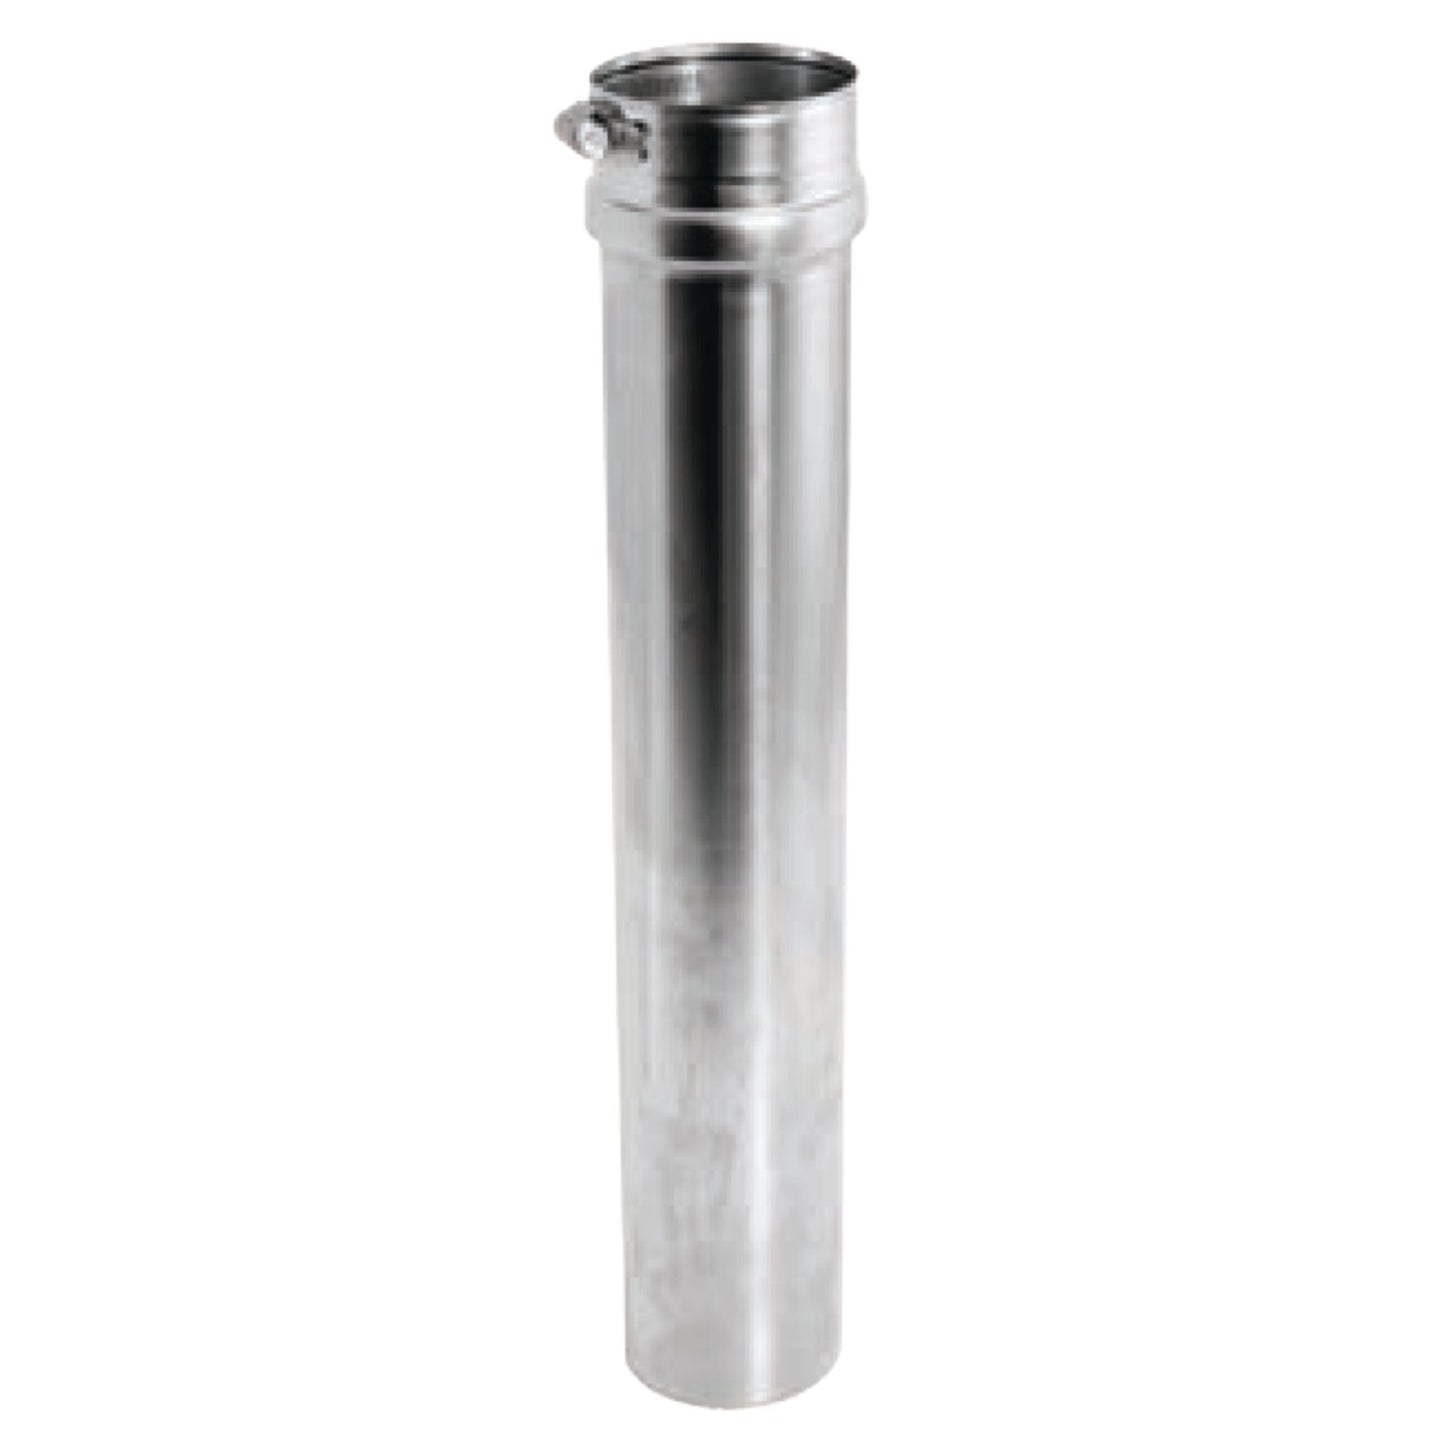 DuraVent FasNSeal 7" x 18" 29-4C Stainless Steel Adjustable Vent Length